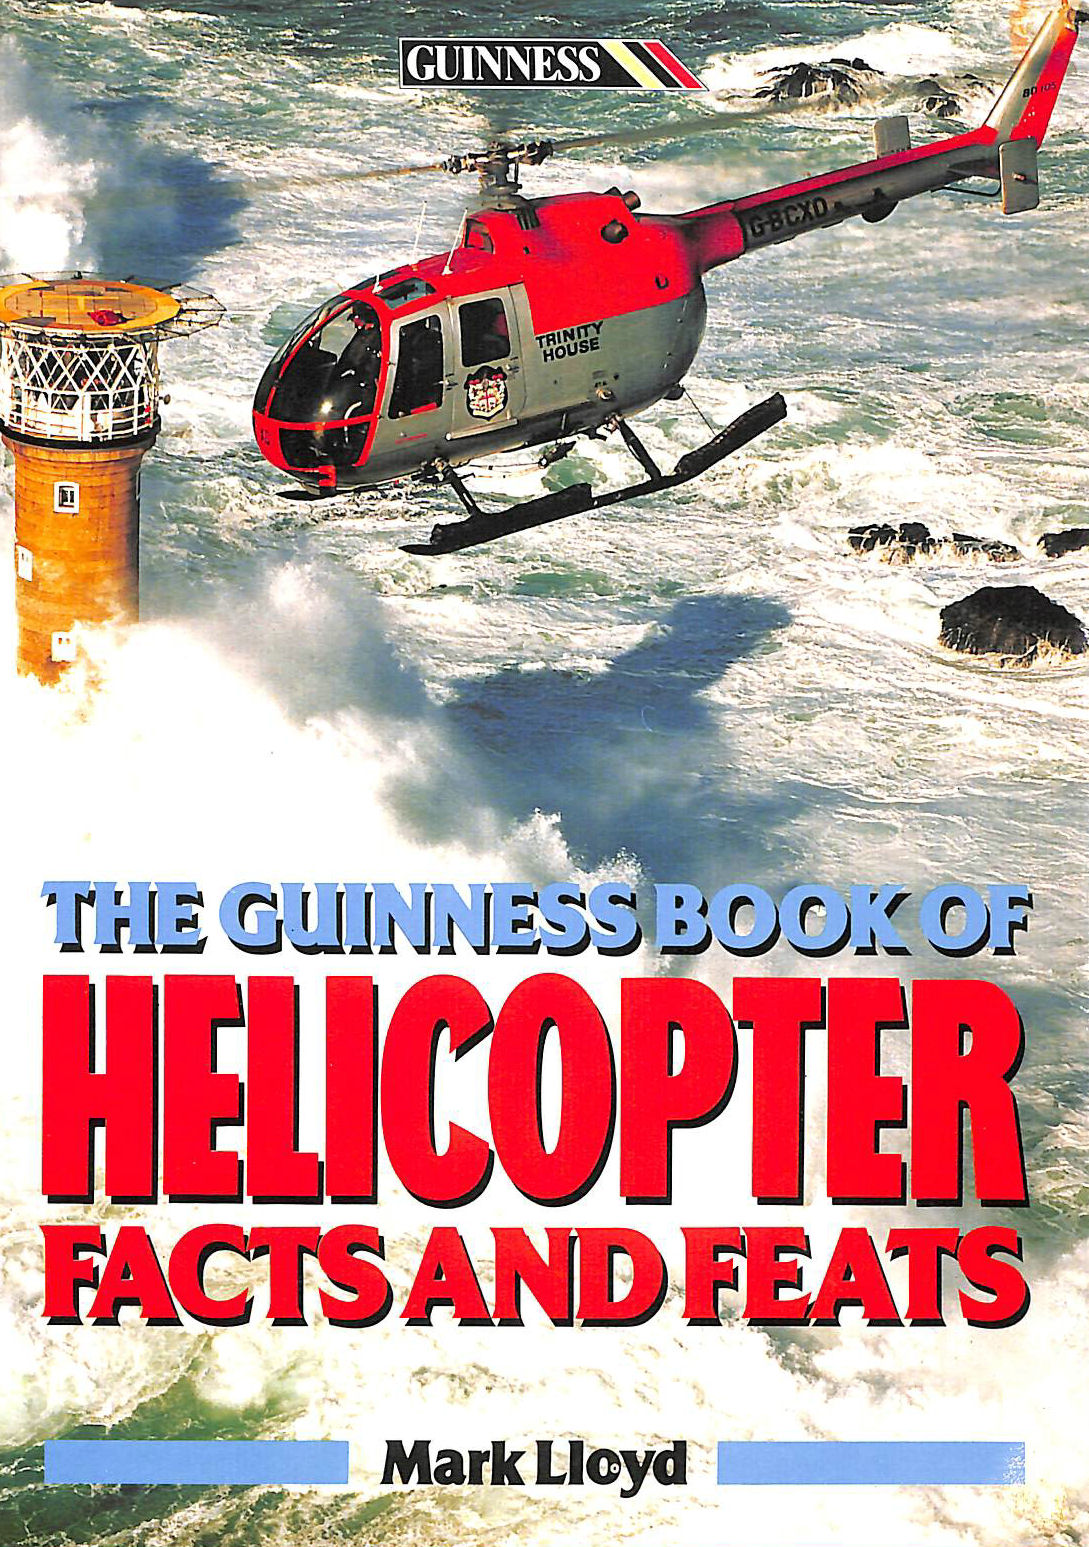 MARK LLOYD - The Guinness Book of Helicopter Facts and Feats